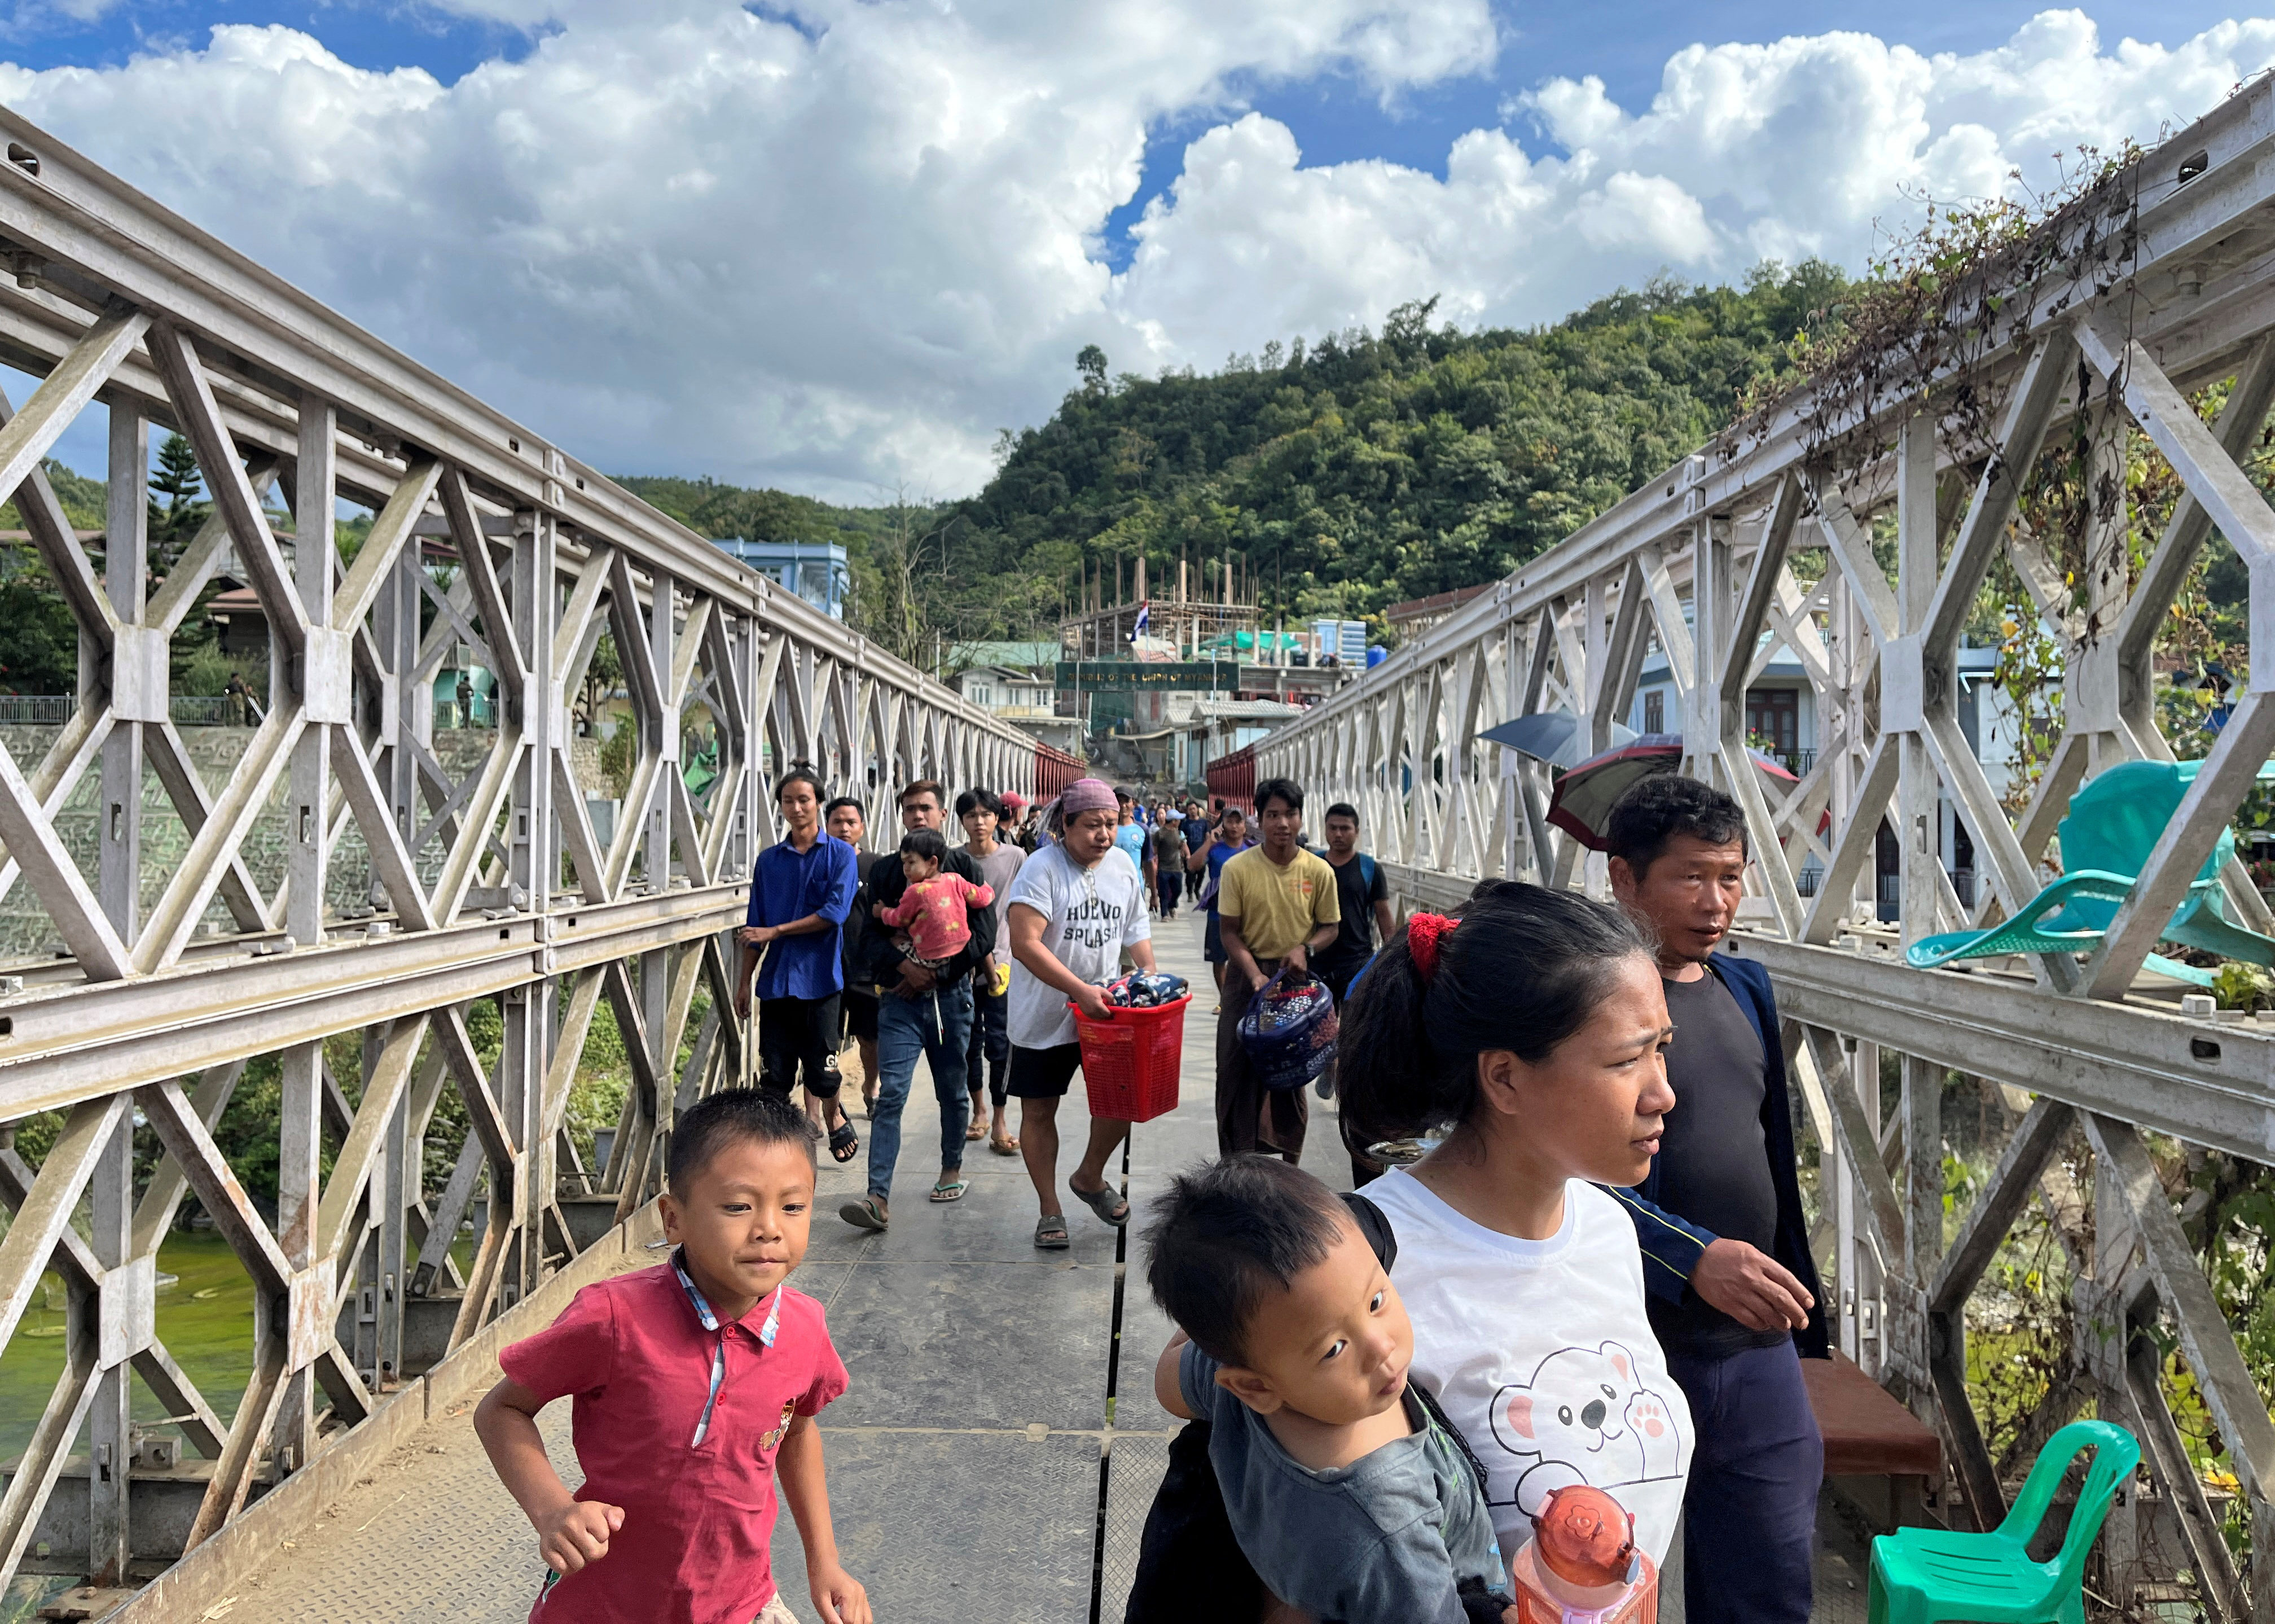 People who fled Myanmar carry their belongings across a bridge that connects Myanmar and India at the border village of Zokhawthar, Champhai district, in India’s northeastern state of Mizoram on November 15. Photo: Reuters